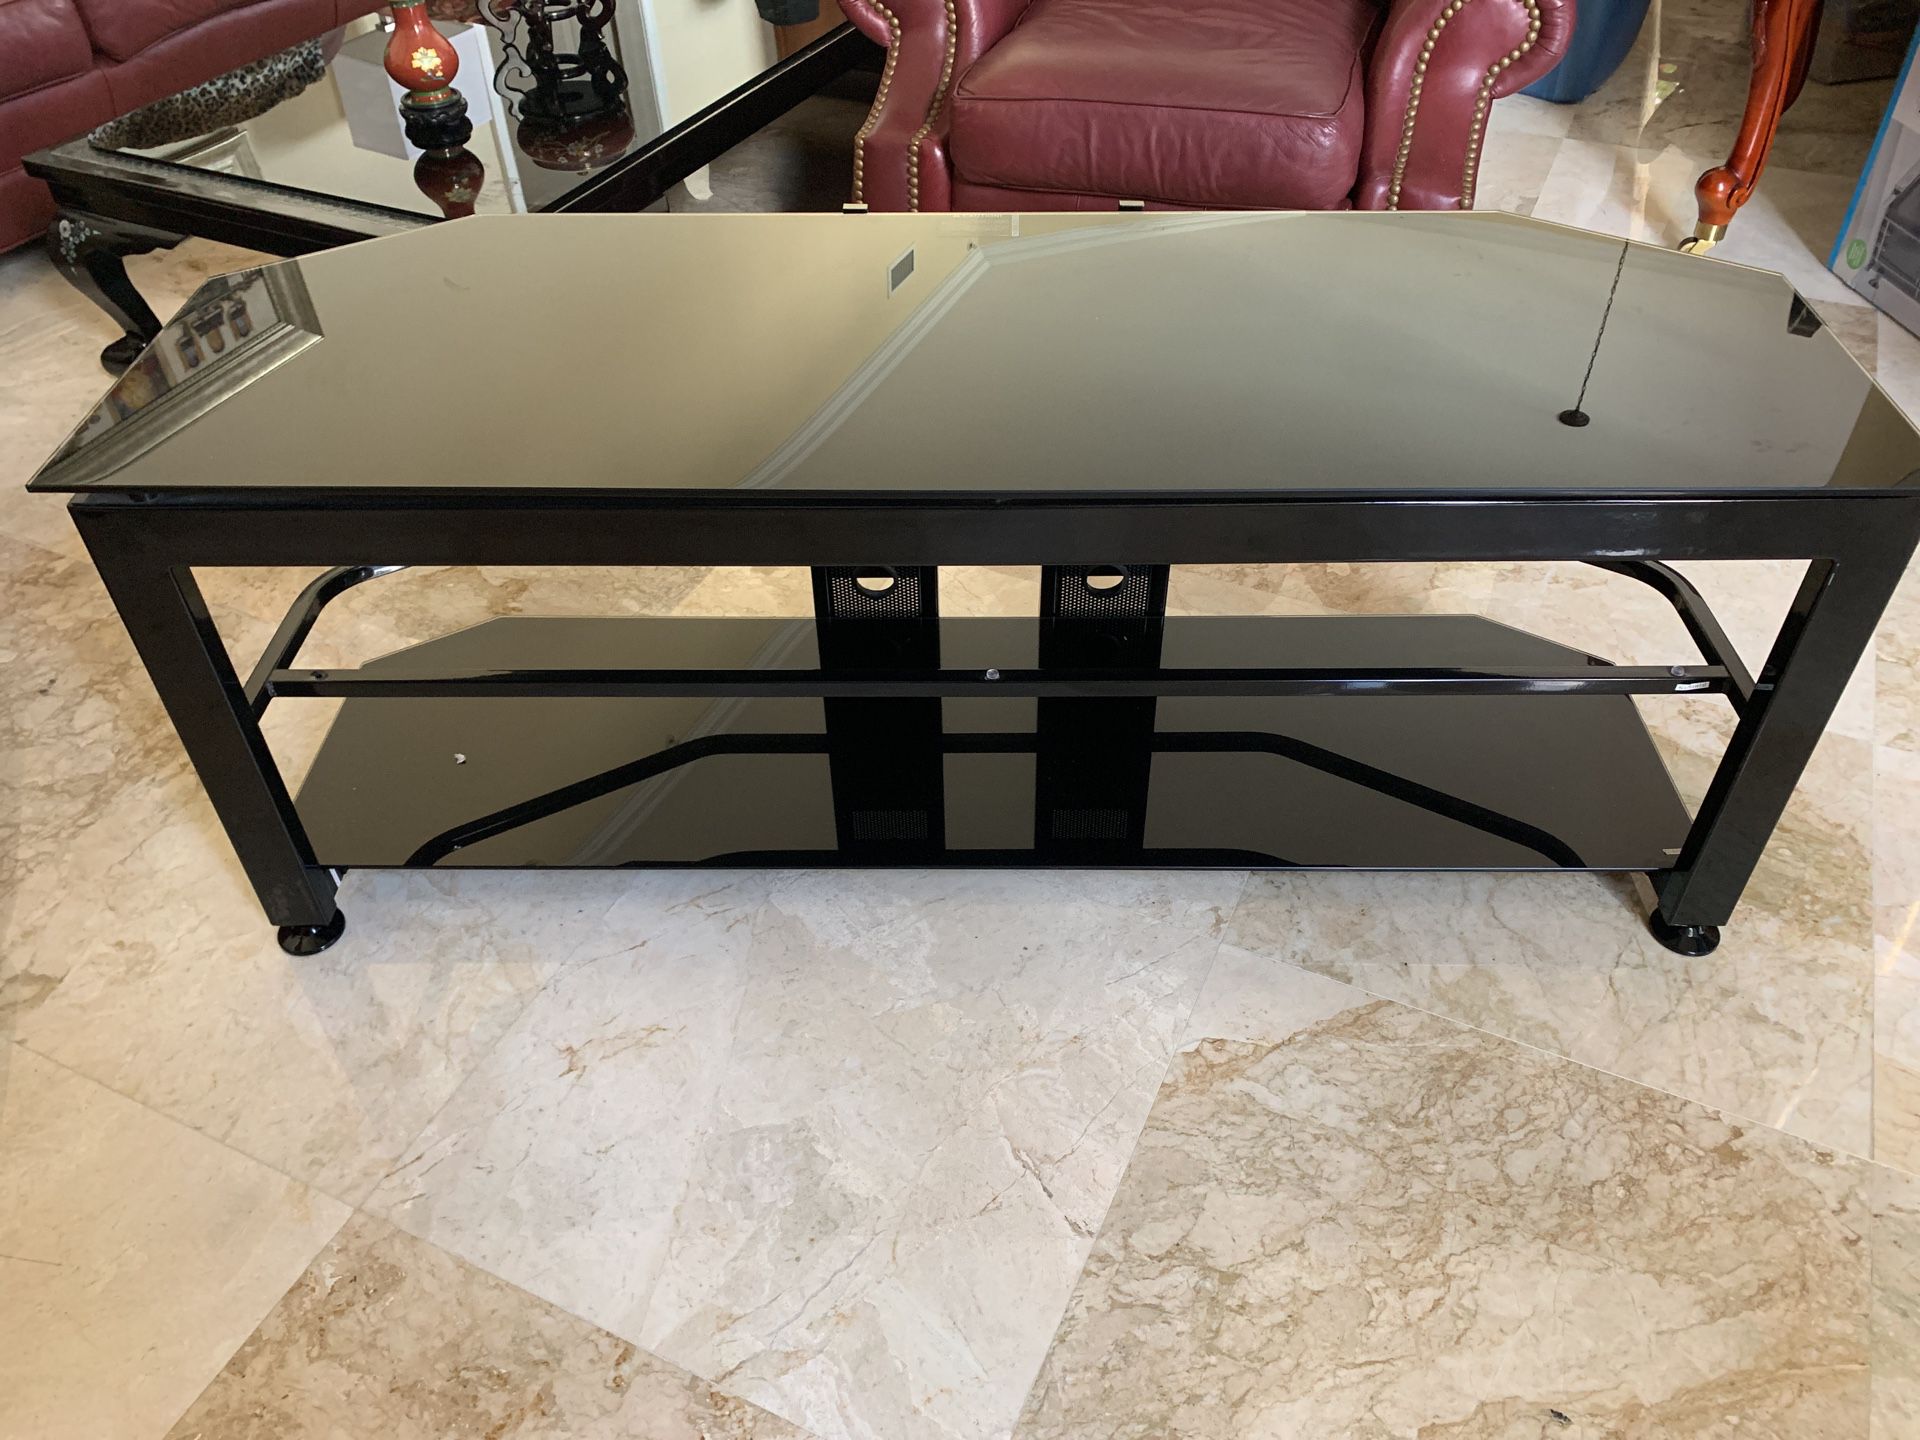 PREMIUM TV stand need gone today!